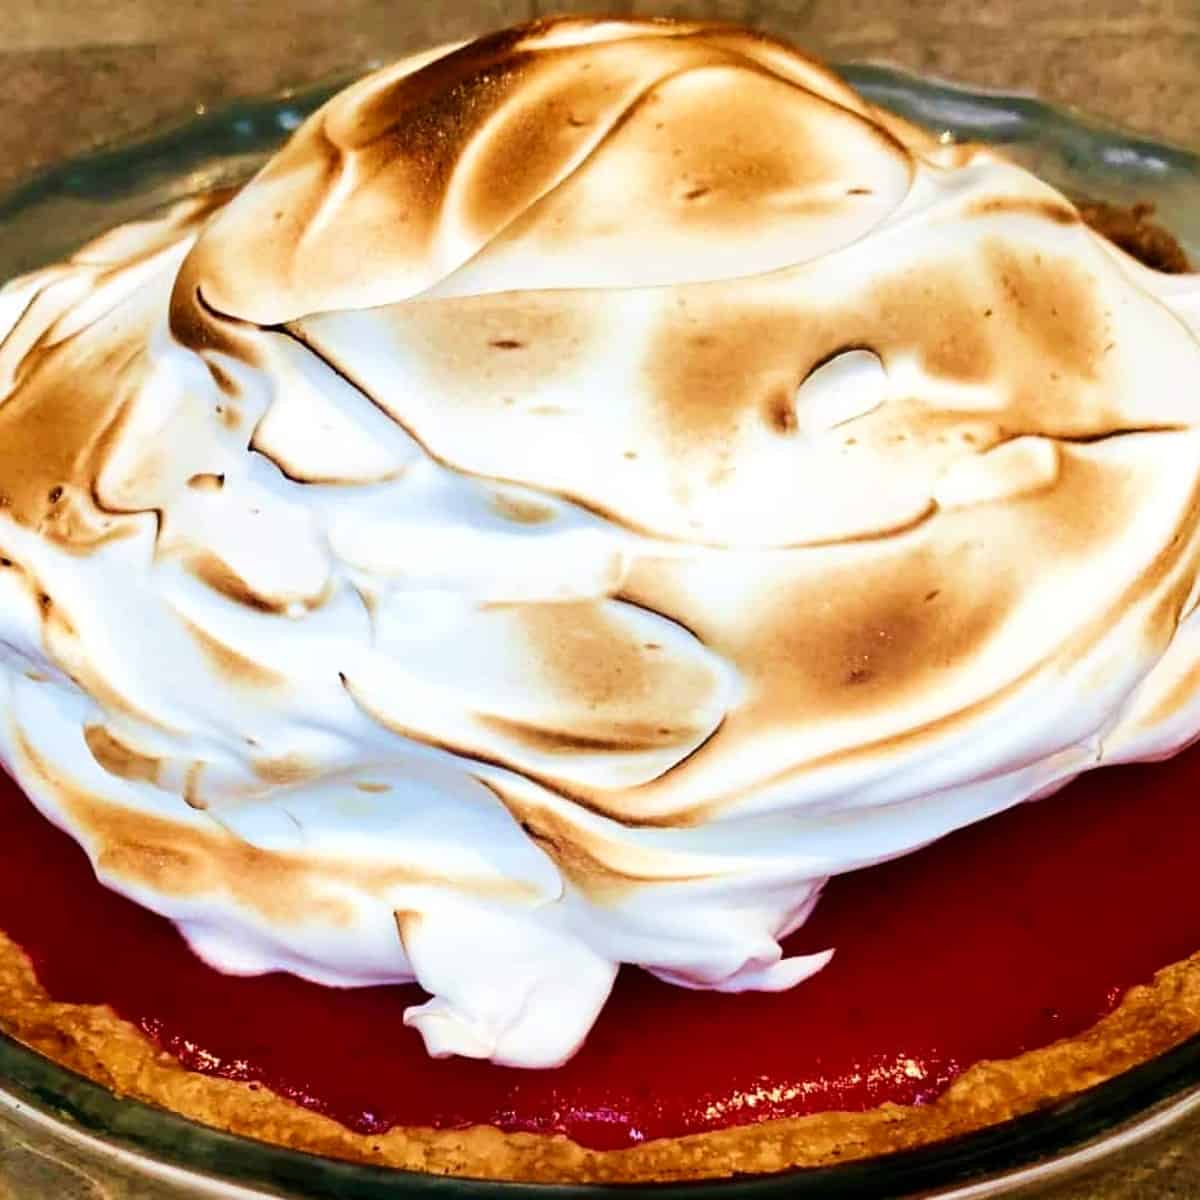 lemon cranberry pie with a toasted meringue topping.